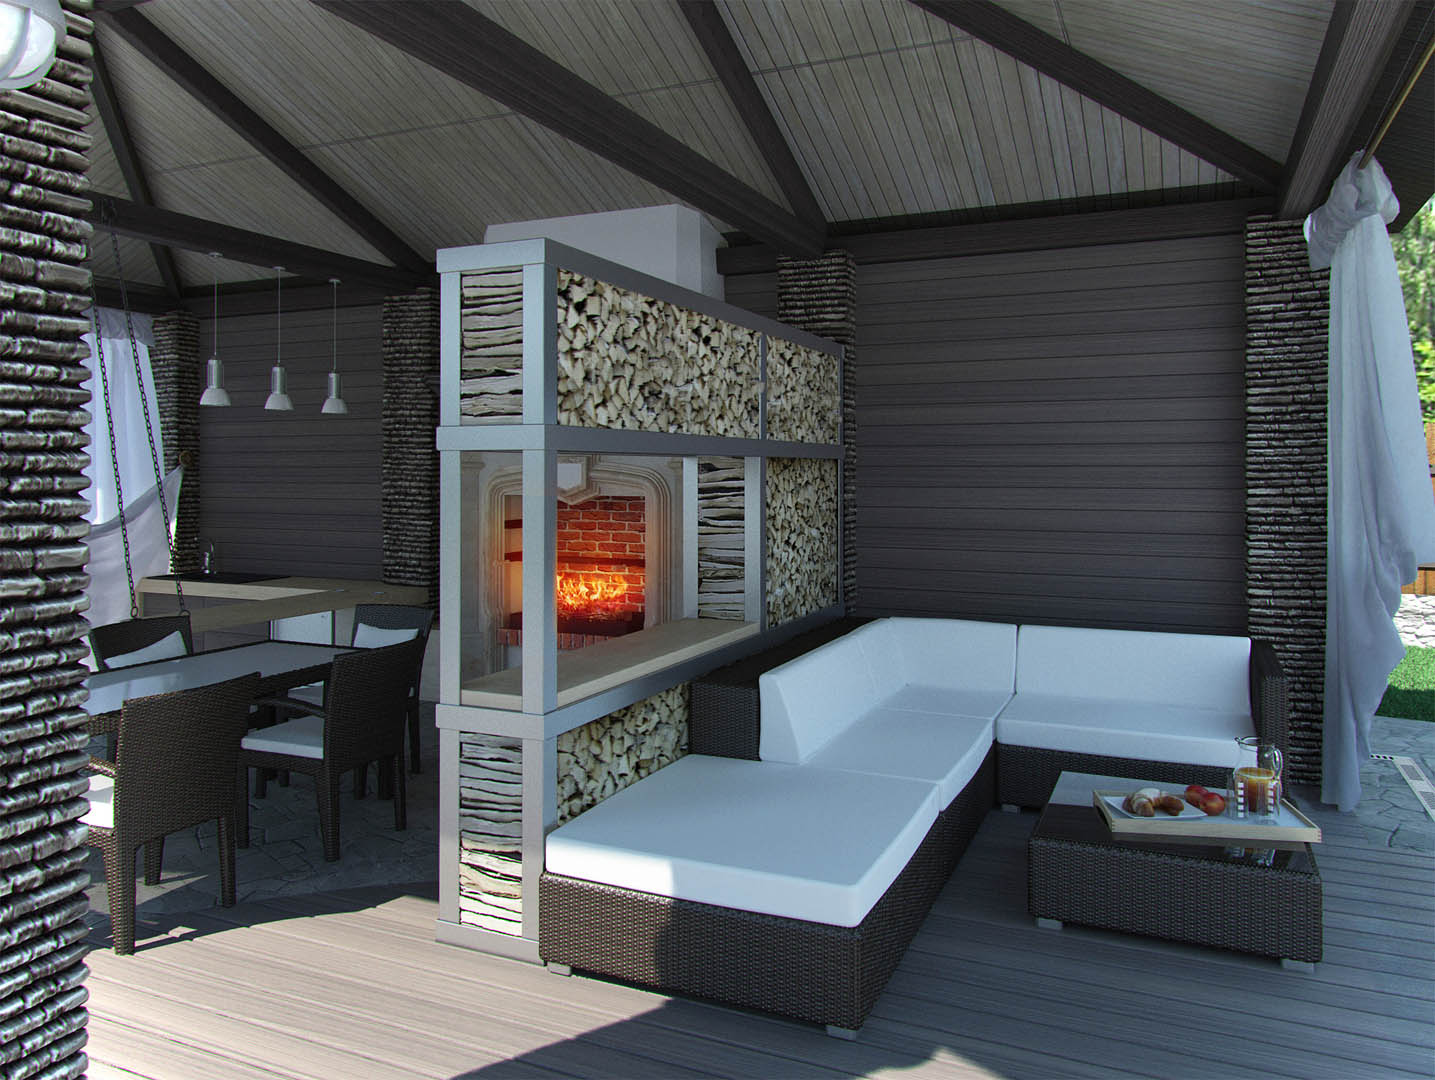 A patio with a fireplace and couch in it